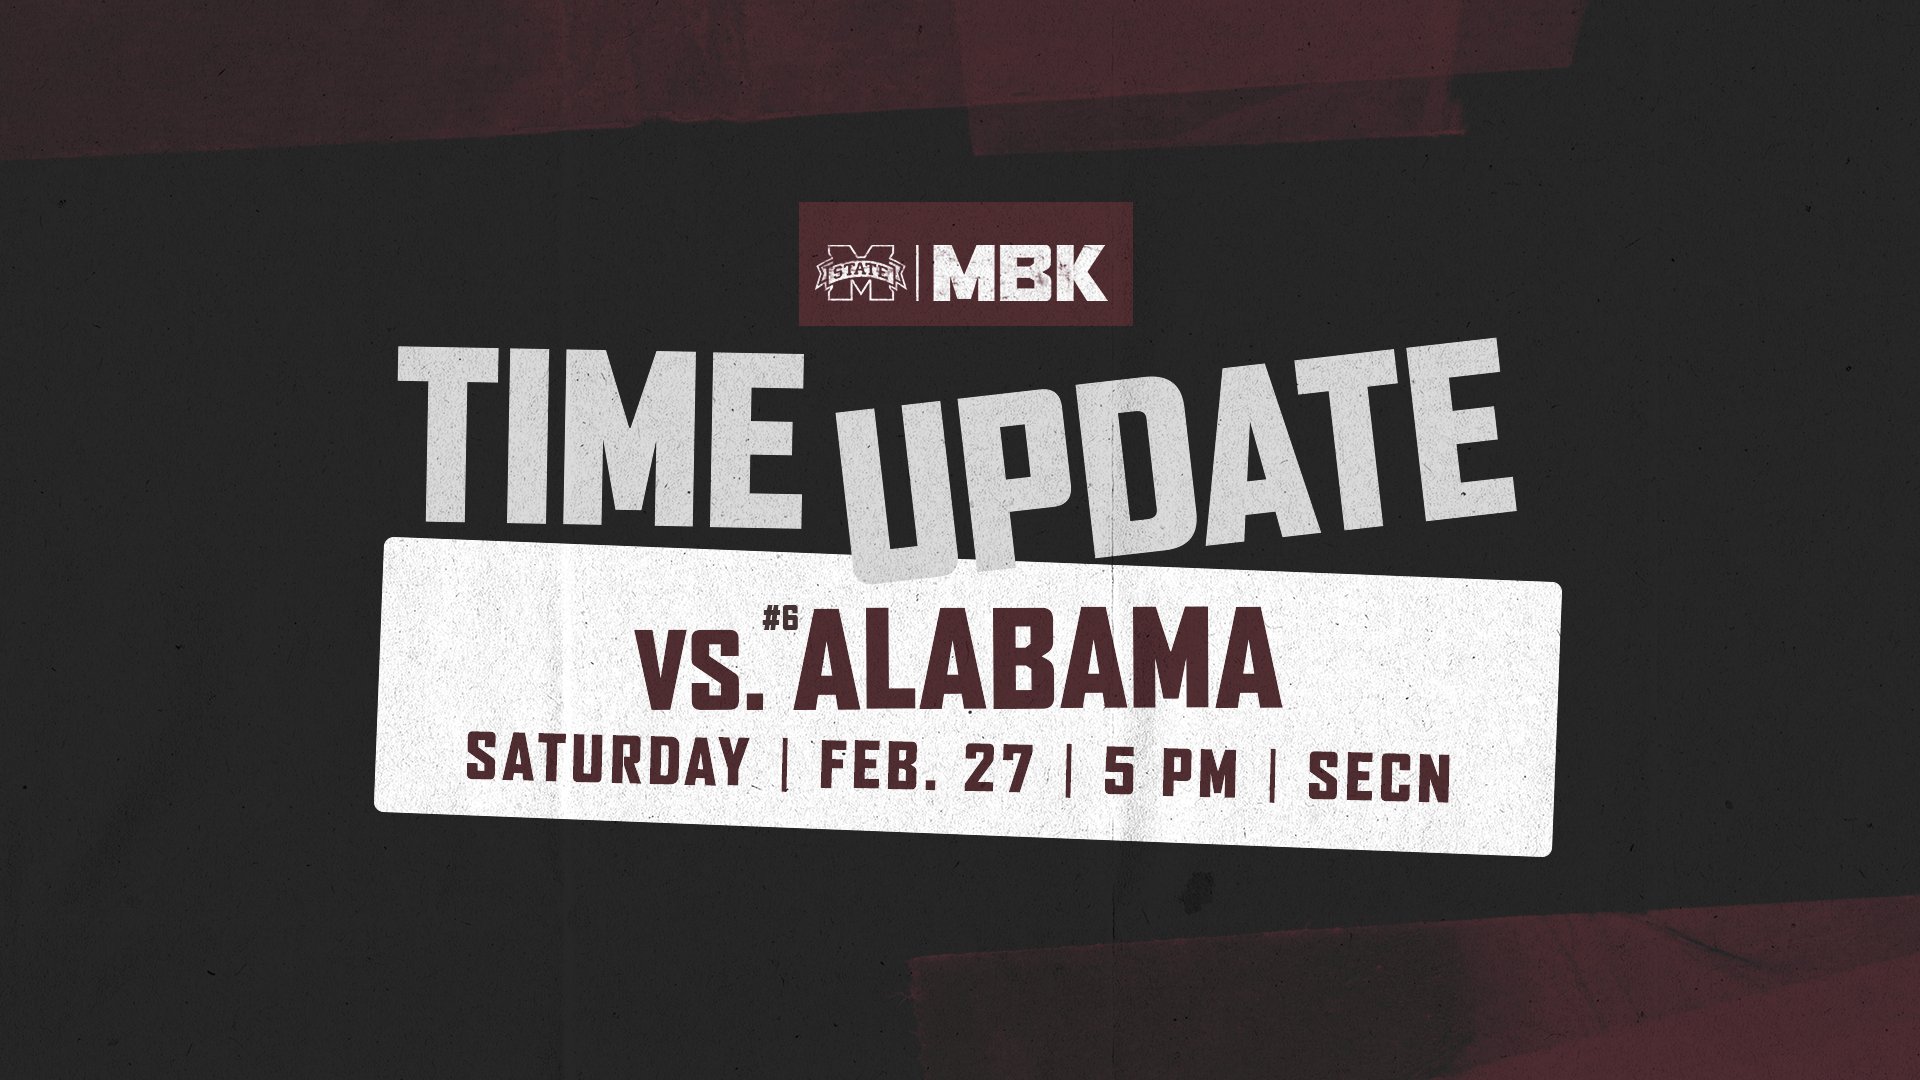 Maroon, white and black graphic announcing a time change for MSU men's basketball vs. Alabama game on Feb. 27